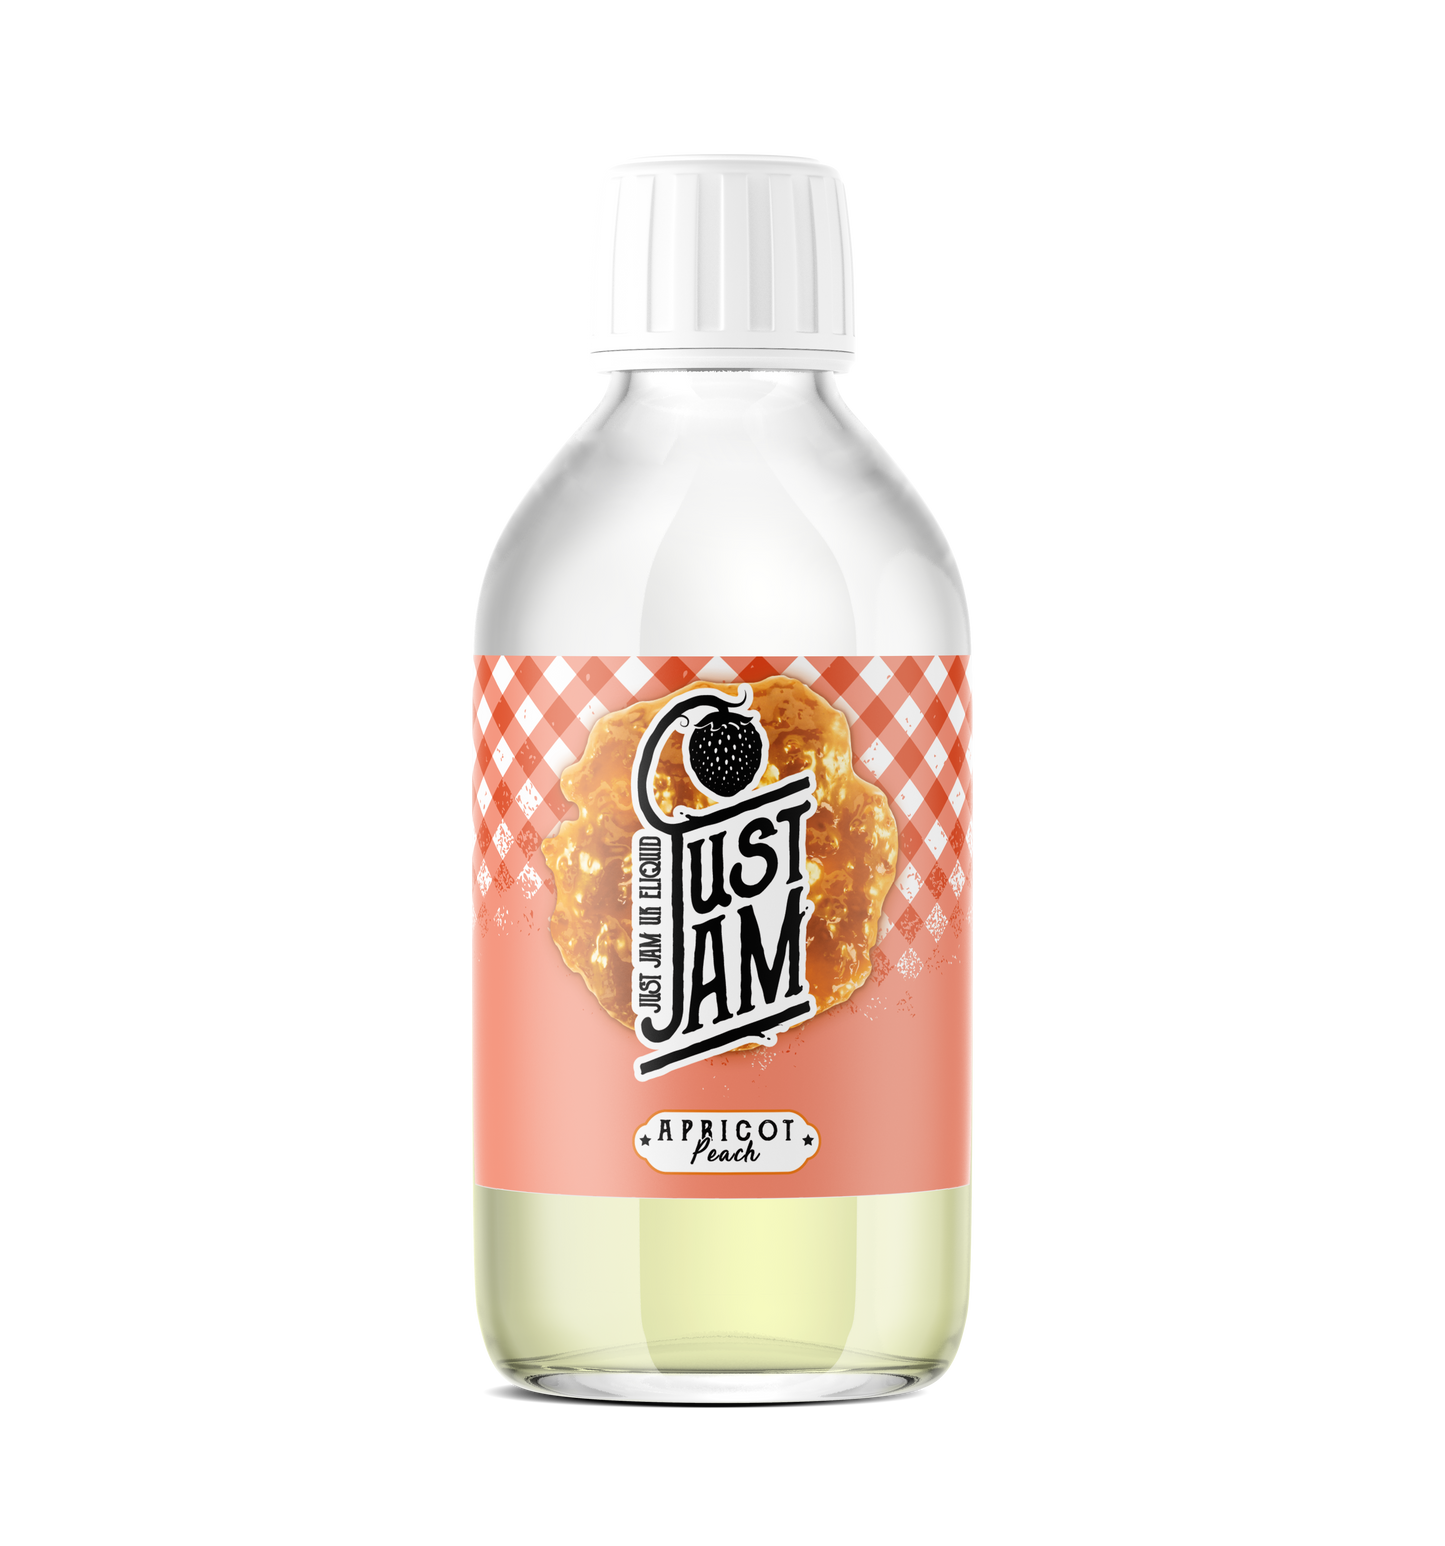 Just Jam - Apricot Peach 200ml - The Ace Of Vapez